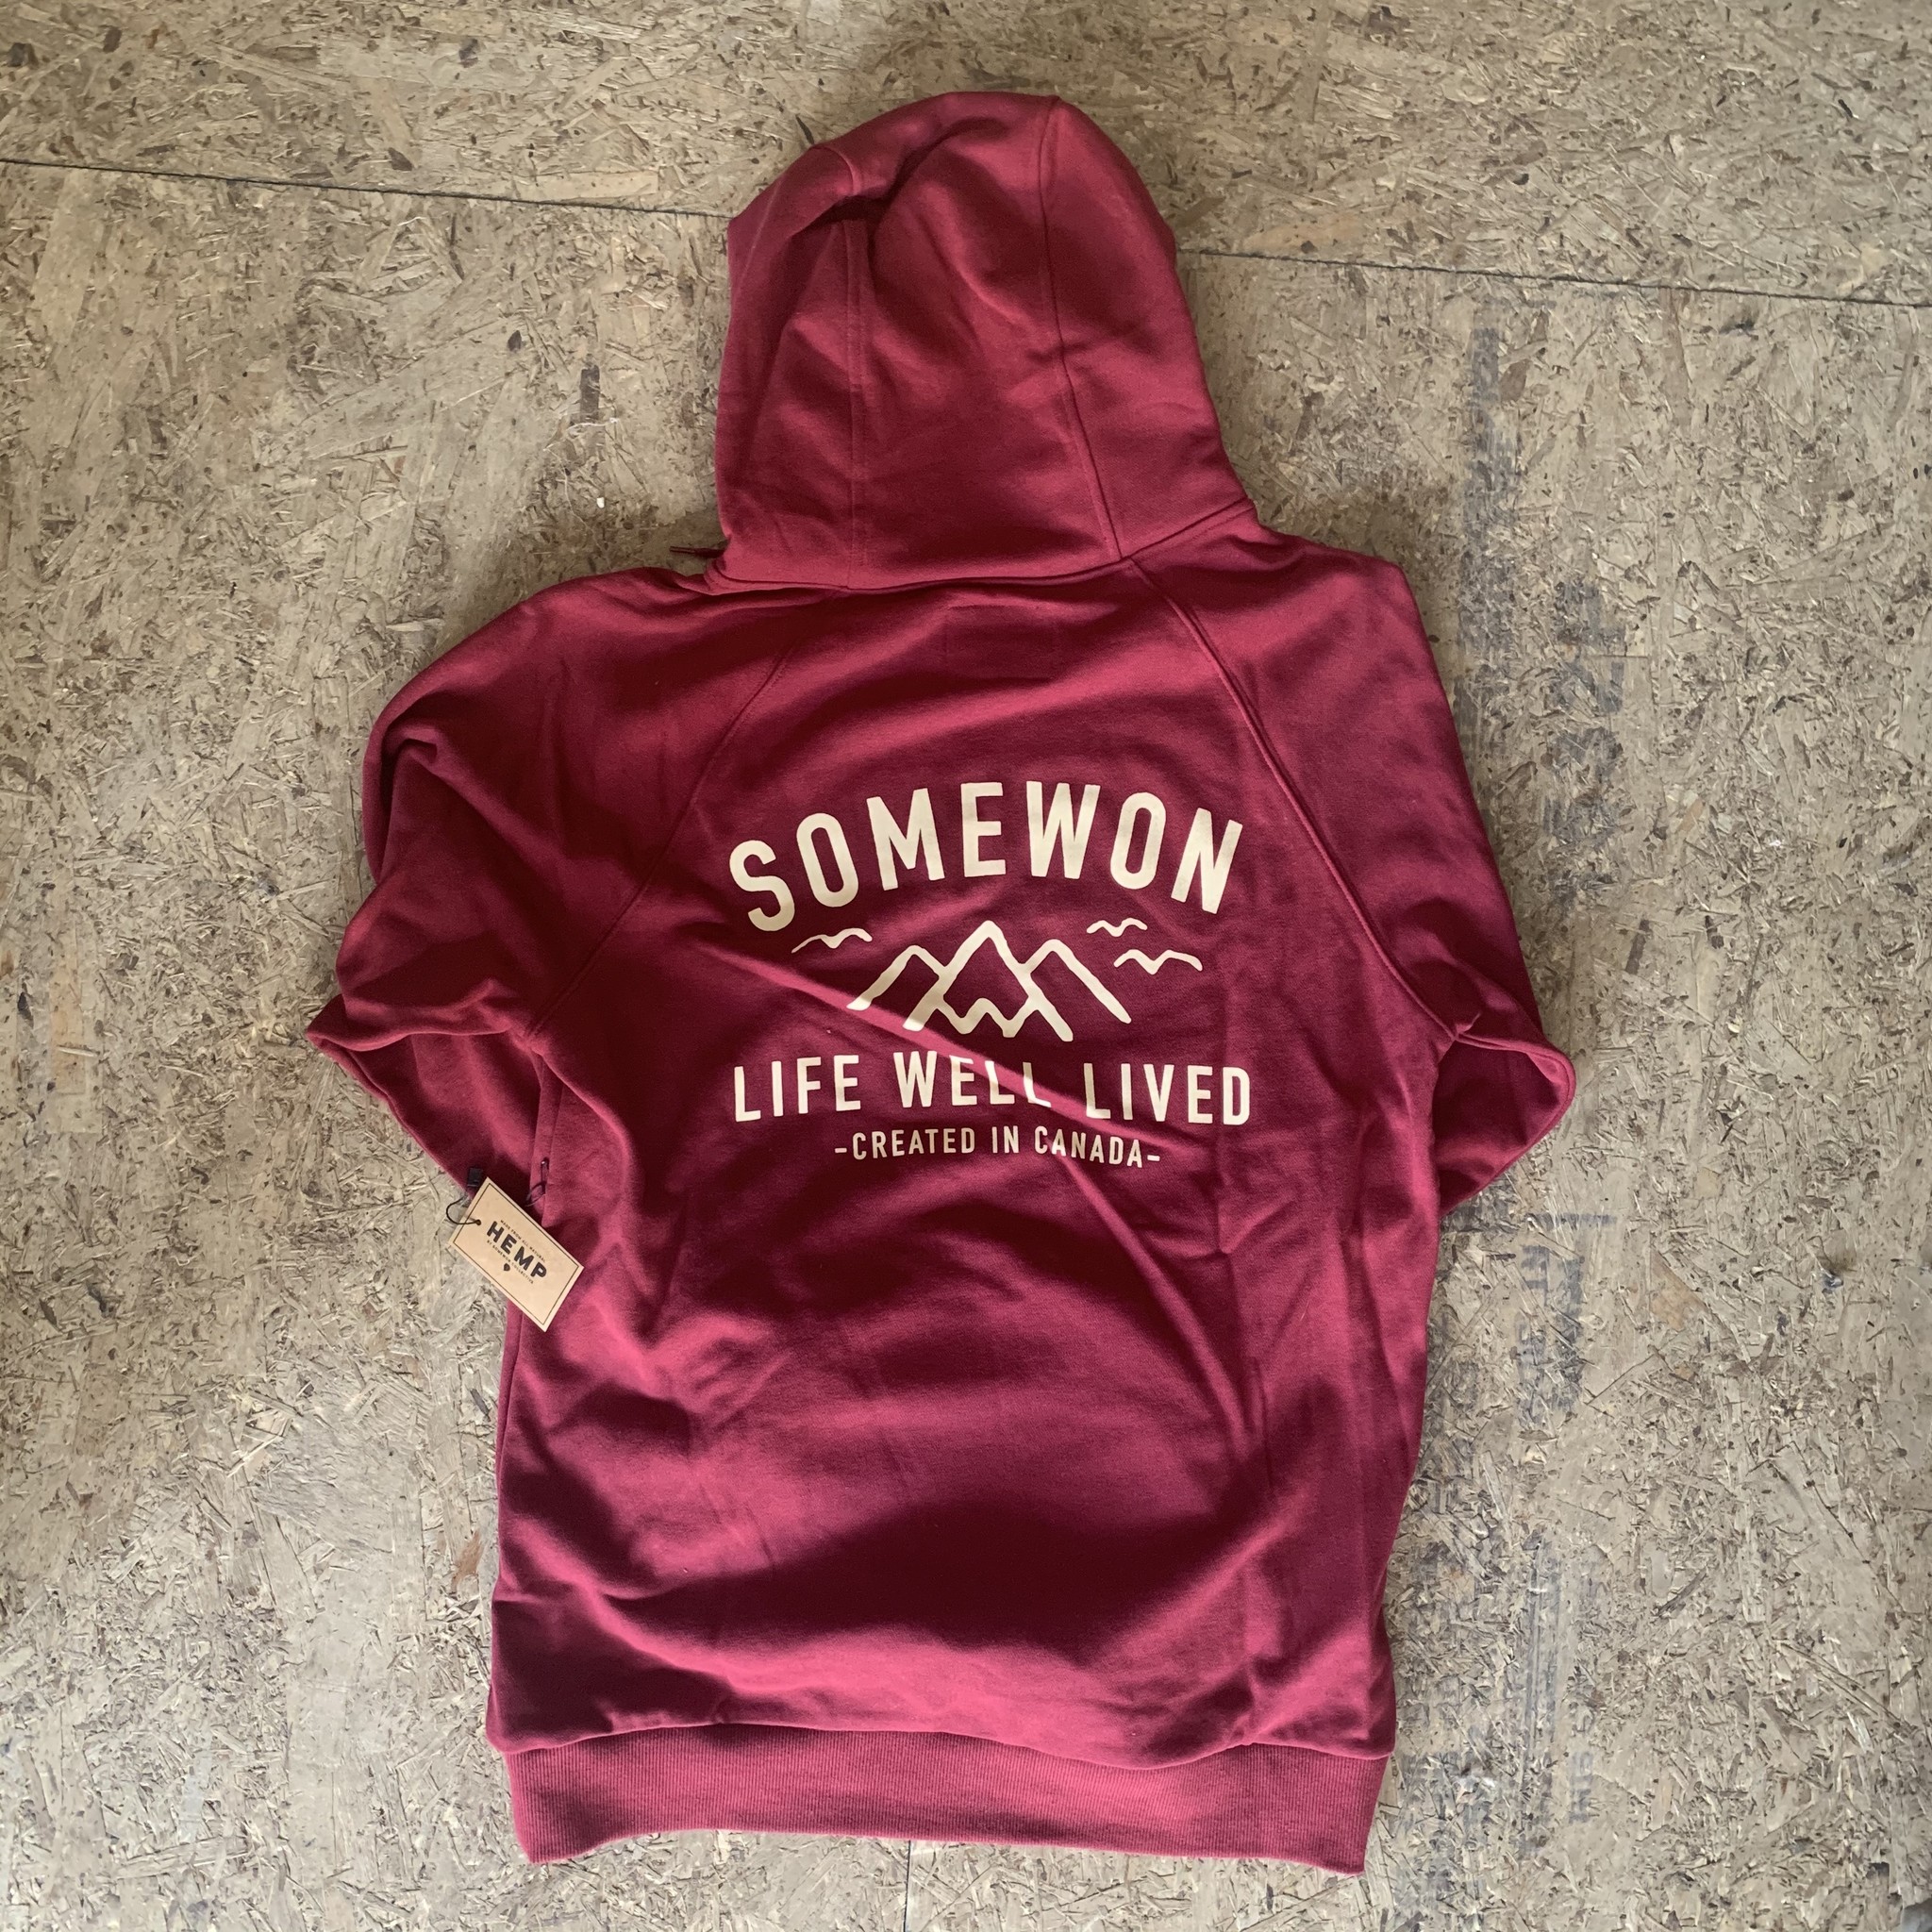 Somewon Collective SomewonCollective - Created Hood